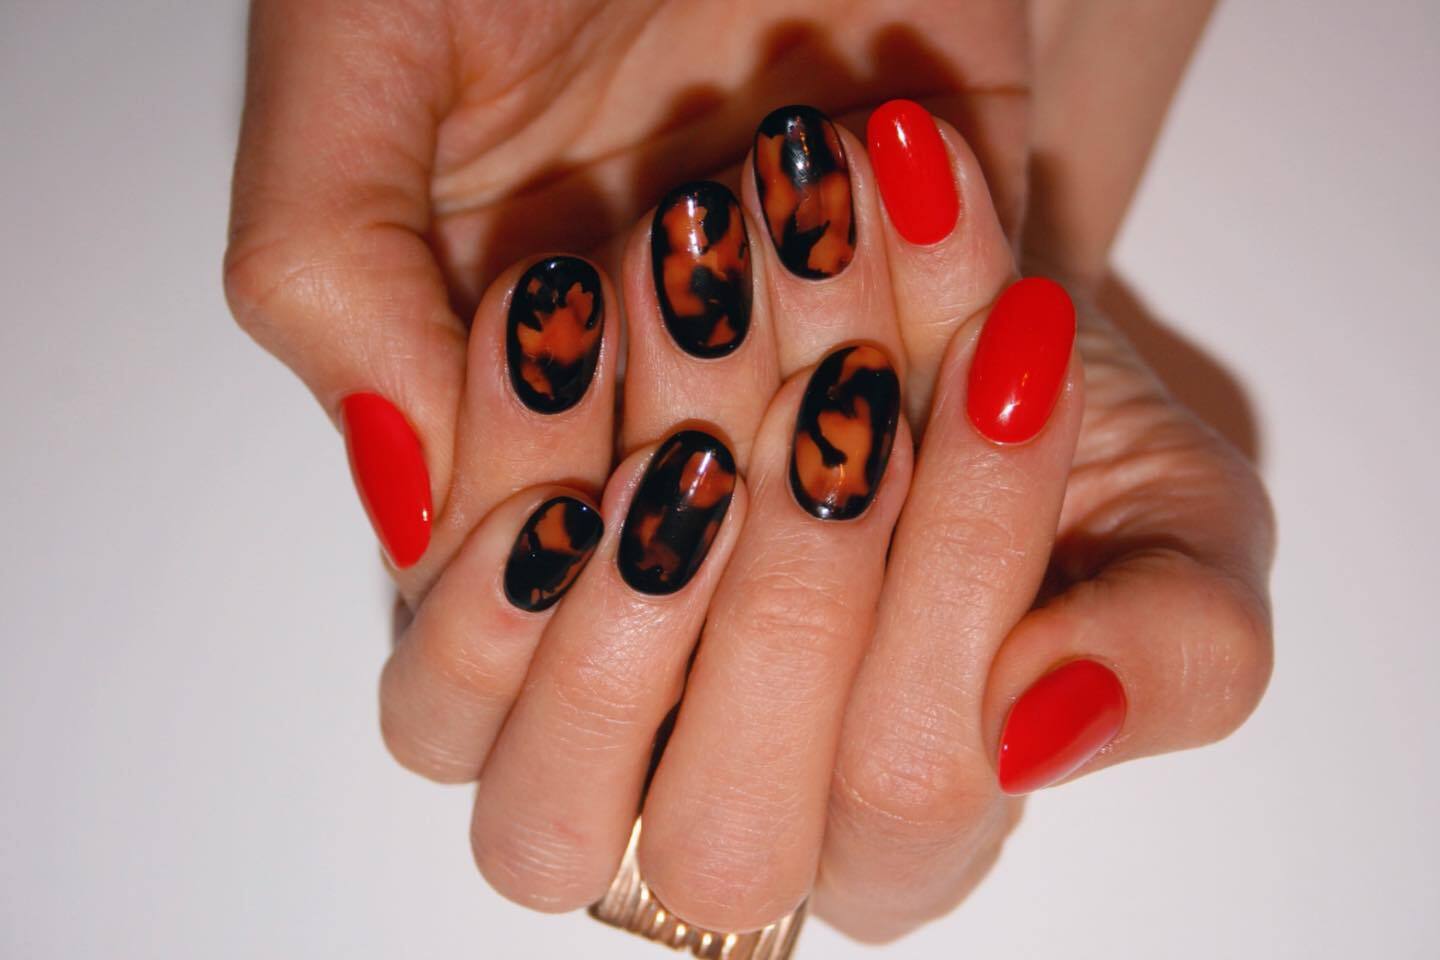 Turtle nails are back in fashion: 5 manicure designs that everyone will love